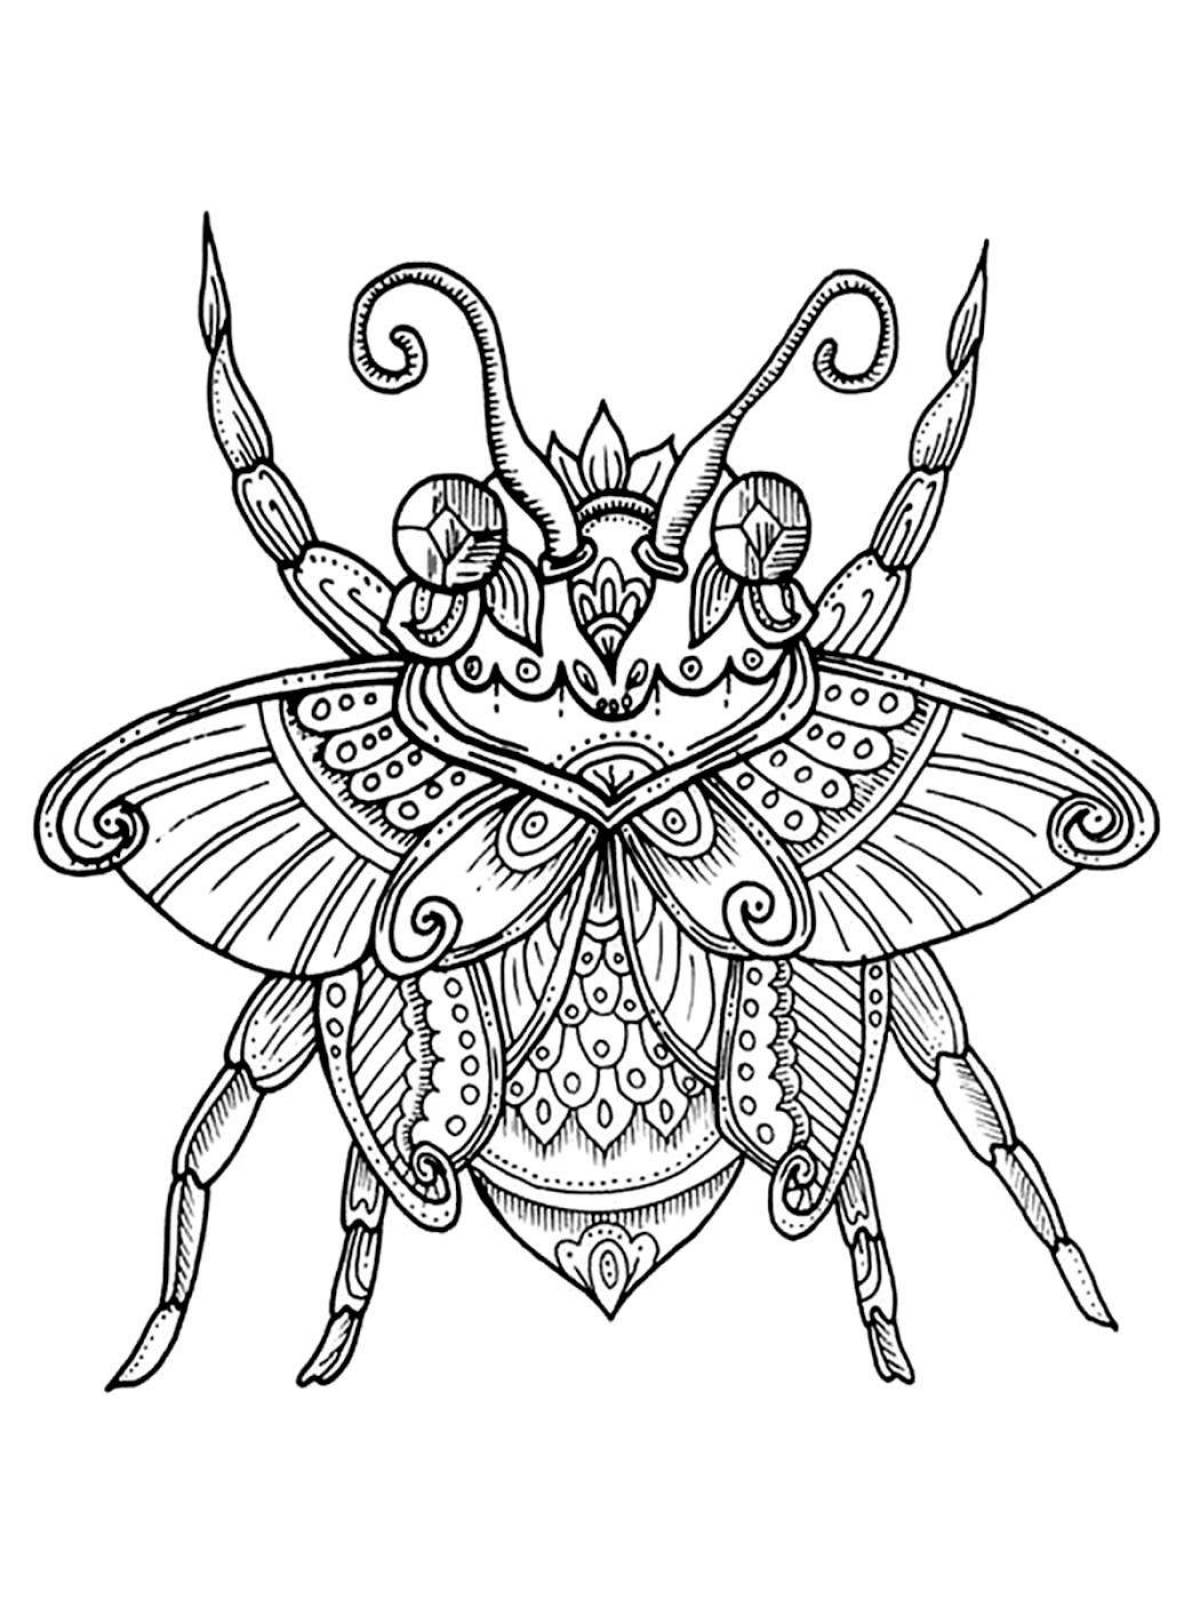 Serene antistress spider coloring page